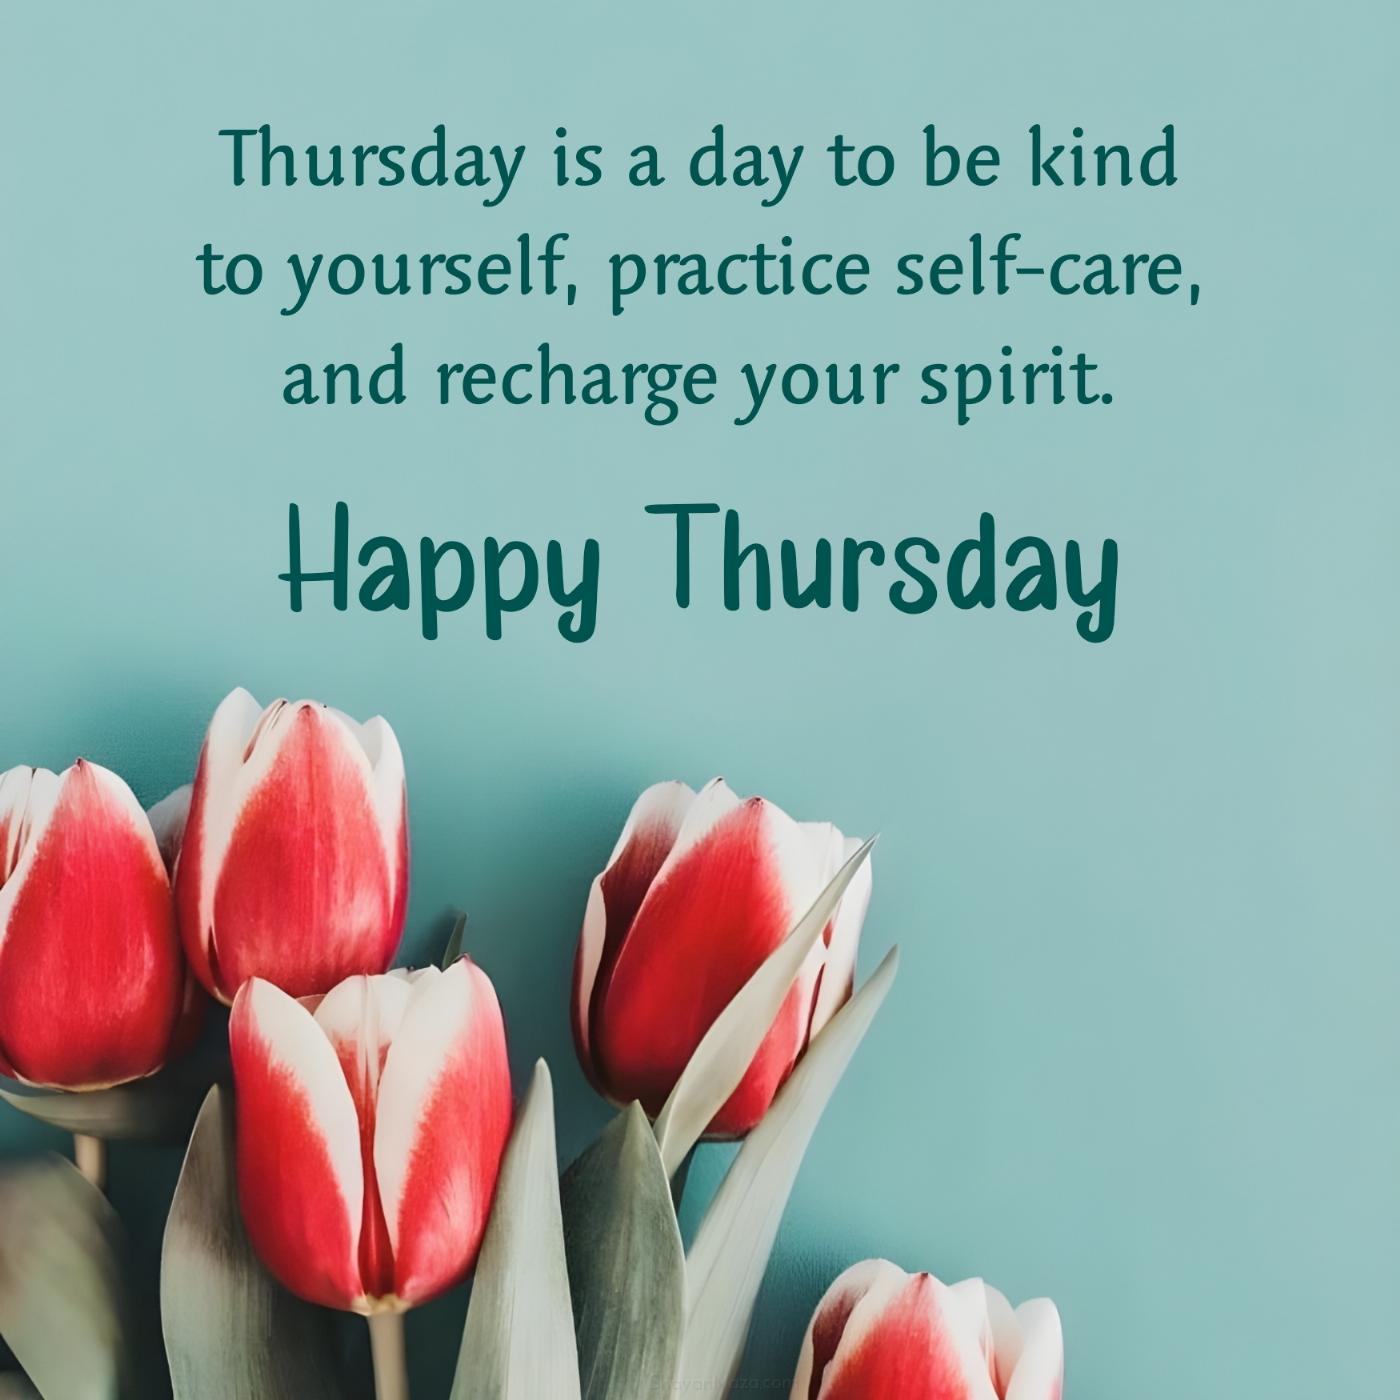 Thursday is a day to be kind to yourself practice self-care